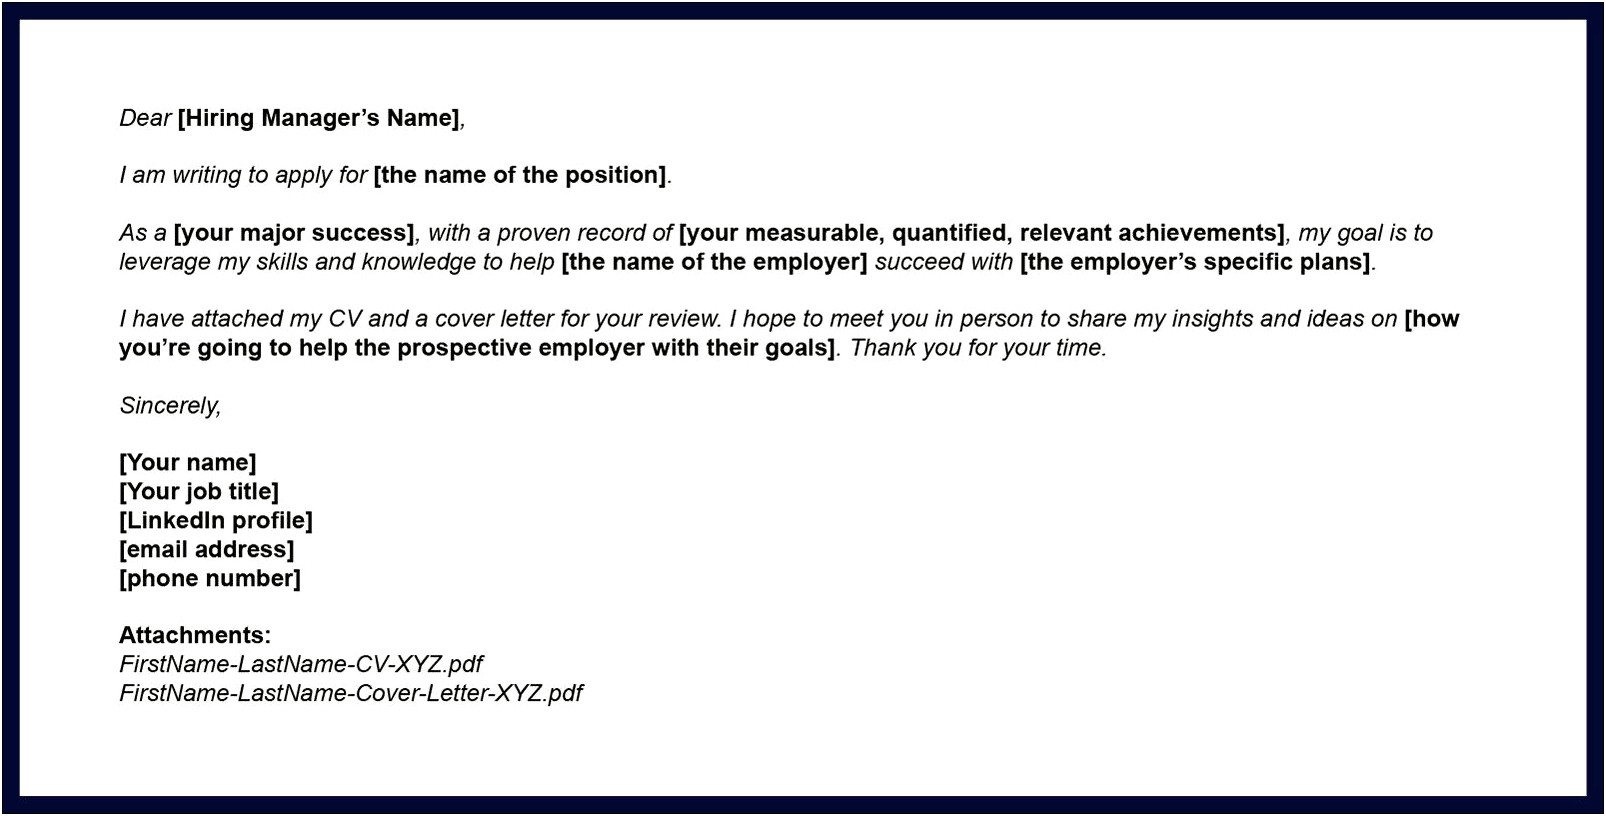 Email Hiring Manager With Resume